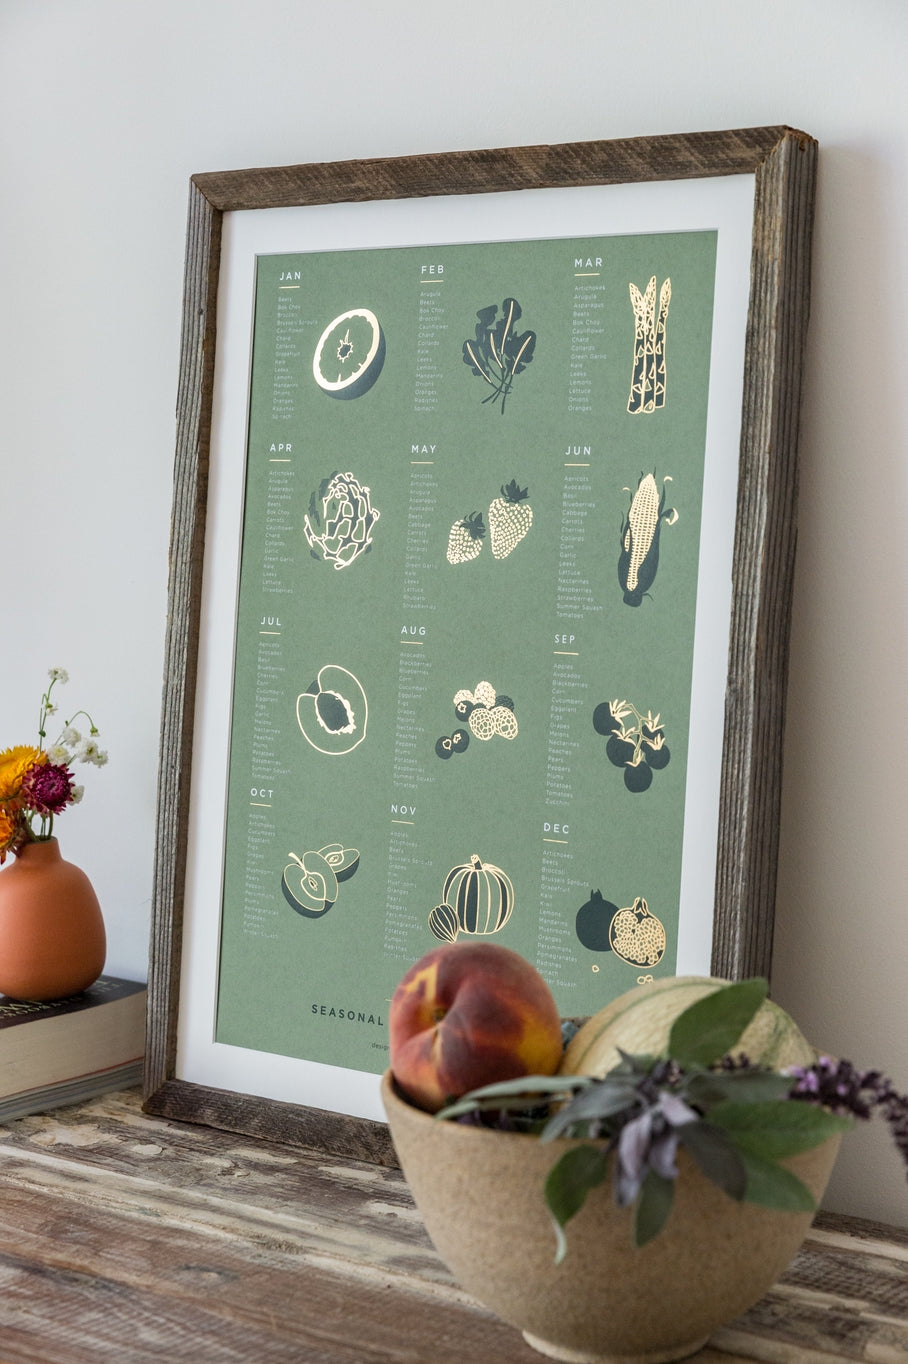 The seasonal fruit and vegetable poster features a monthly list of 15-20 varieties of produce that are freshest, ripest, and harvested within the listed month. Great reference art that is both elegant and useful for your kitchen, dining room or kids room!